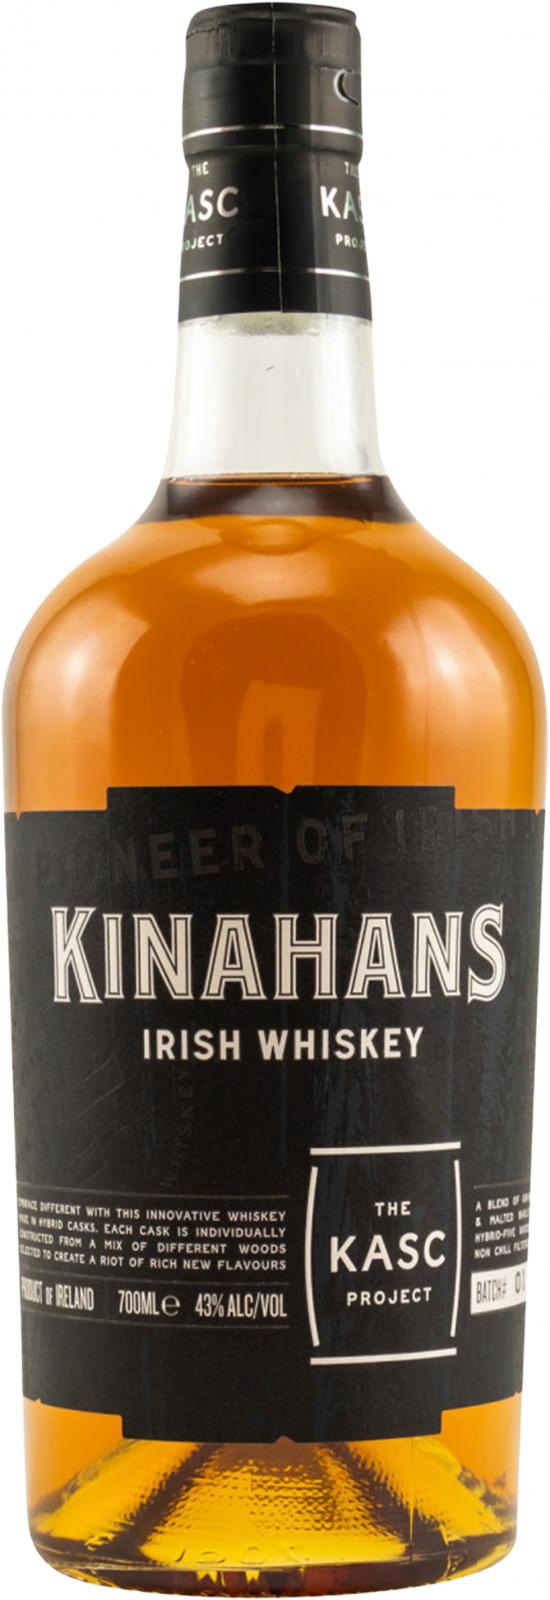 Ratings reviews Kasc - Whiskybase The Project - and Kinahan\'s